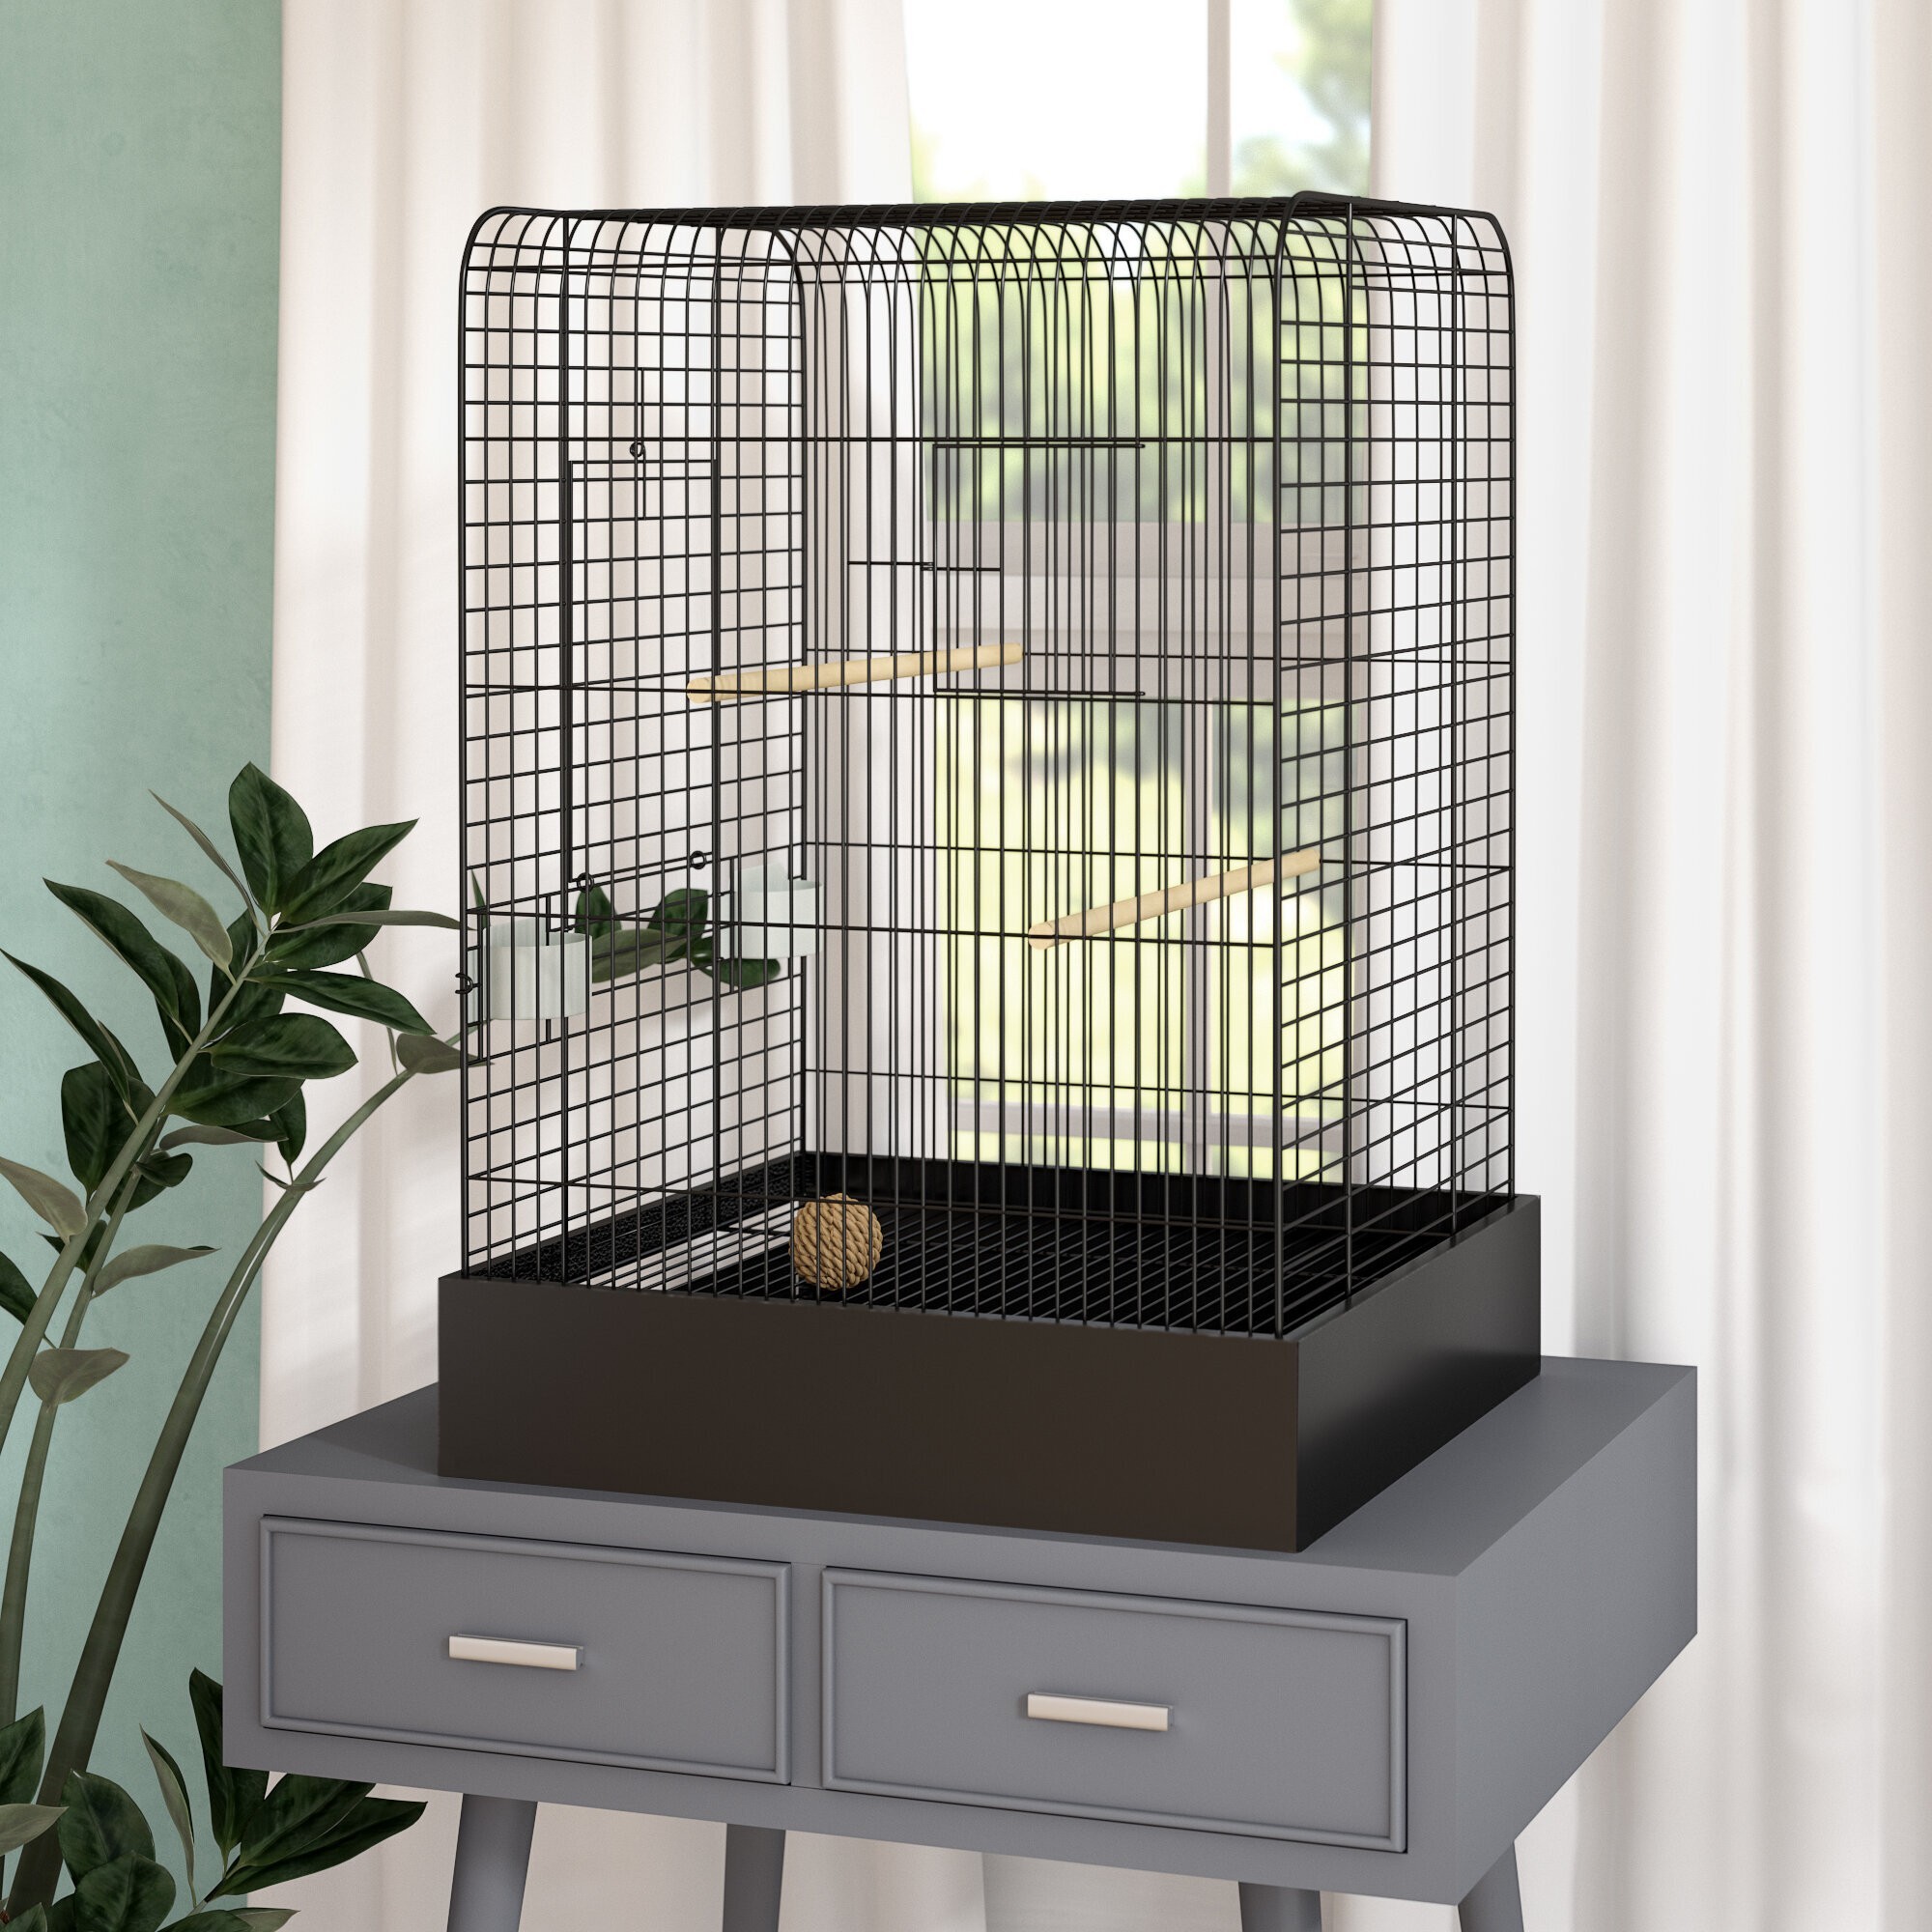 How to Choose a Bird Cage - Foter